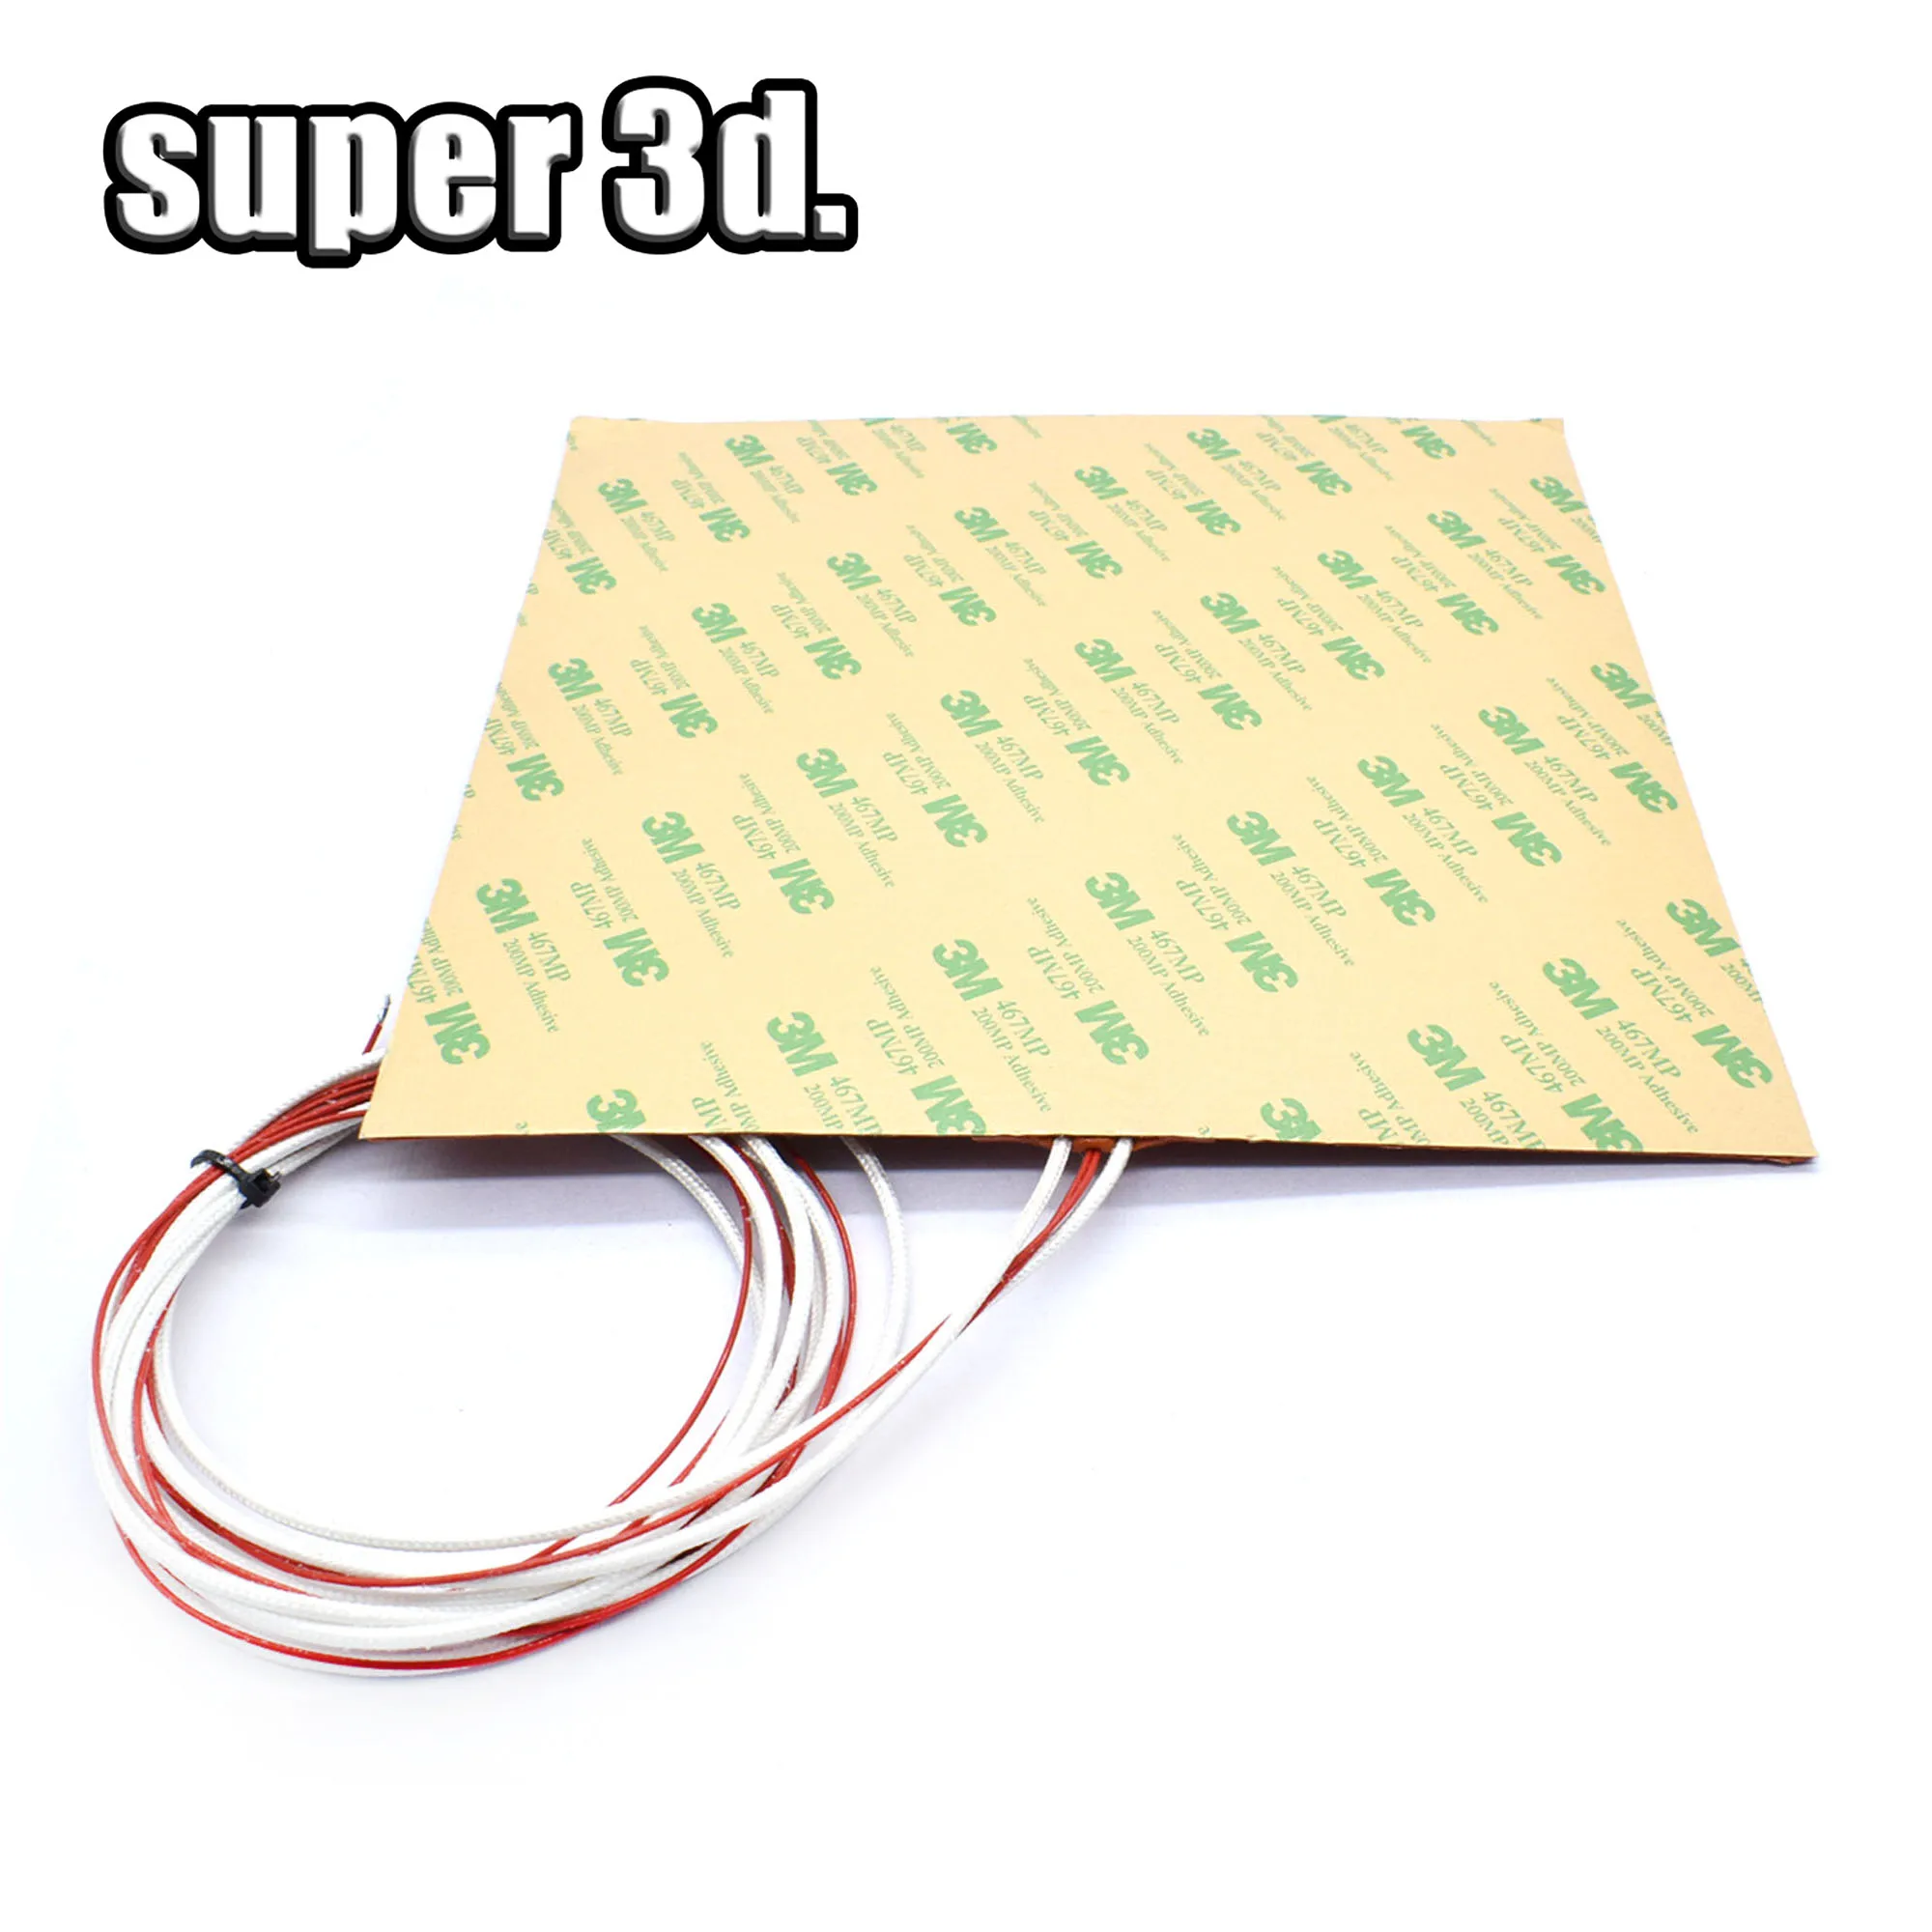 ADUCI 1pc 10x15cm 300W 220V Flexible Waterproof Silicone Heater Bed Pad for Warming Accessories Parts 